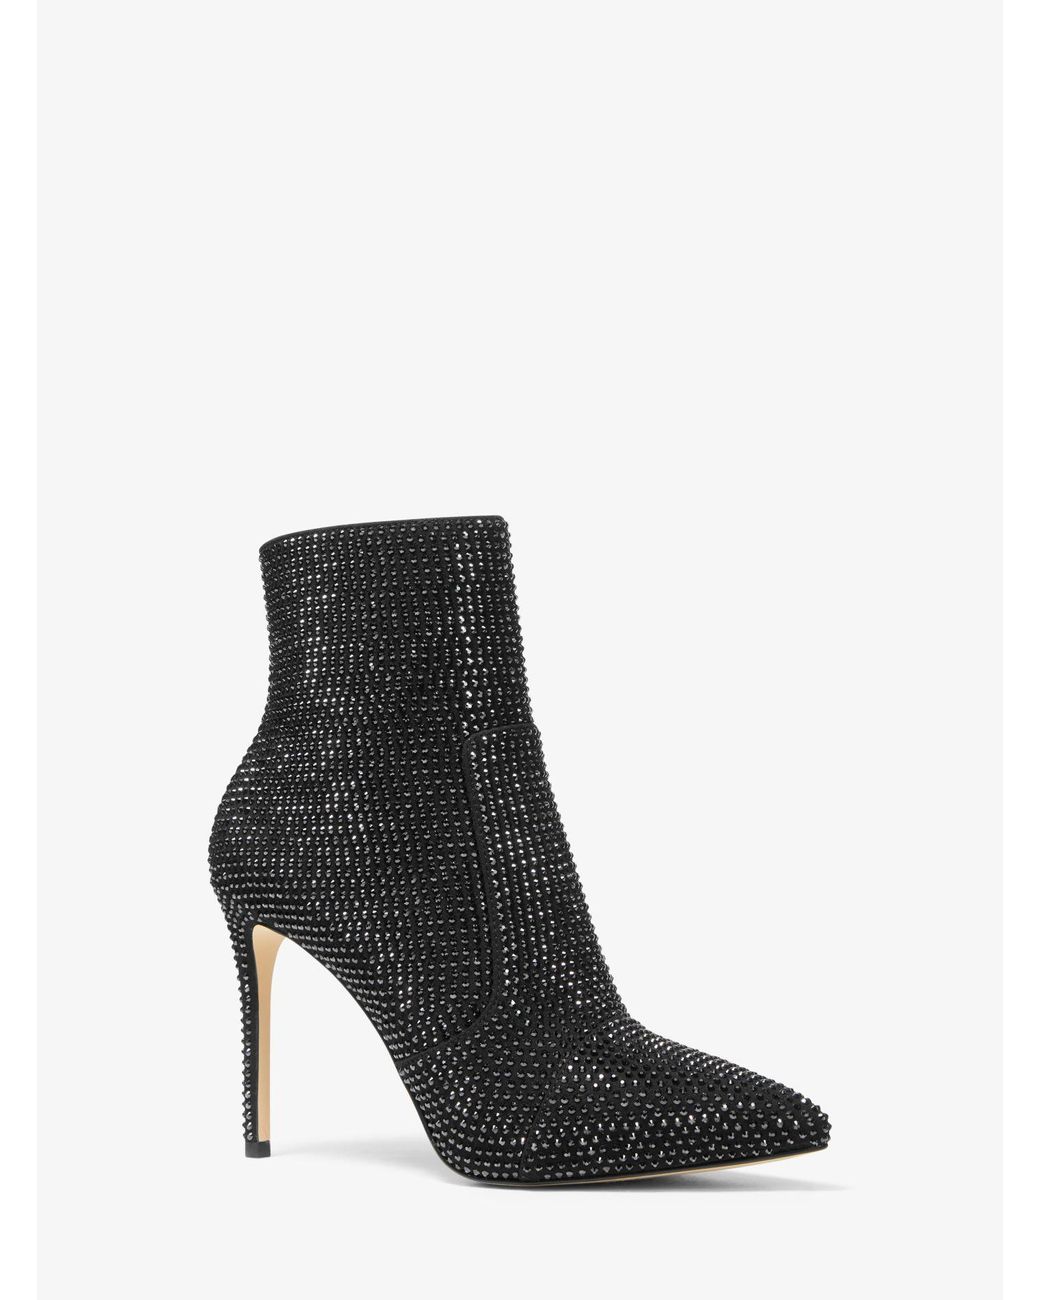 Michael Kors Rue Crystal Embellished Faux Suede Boot in Black | Lyst